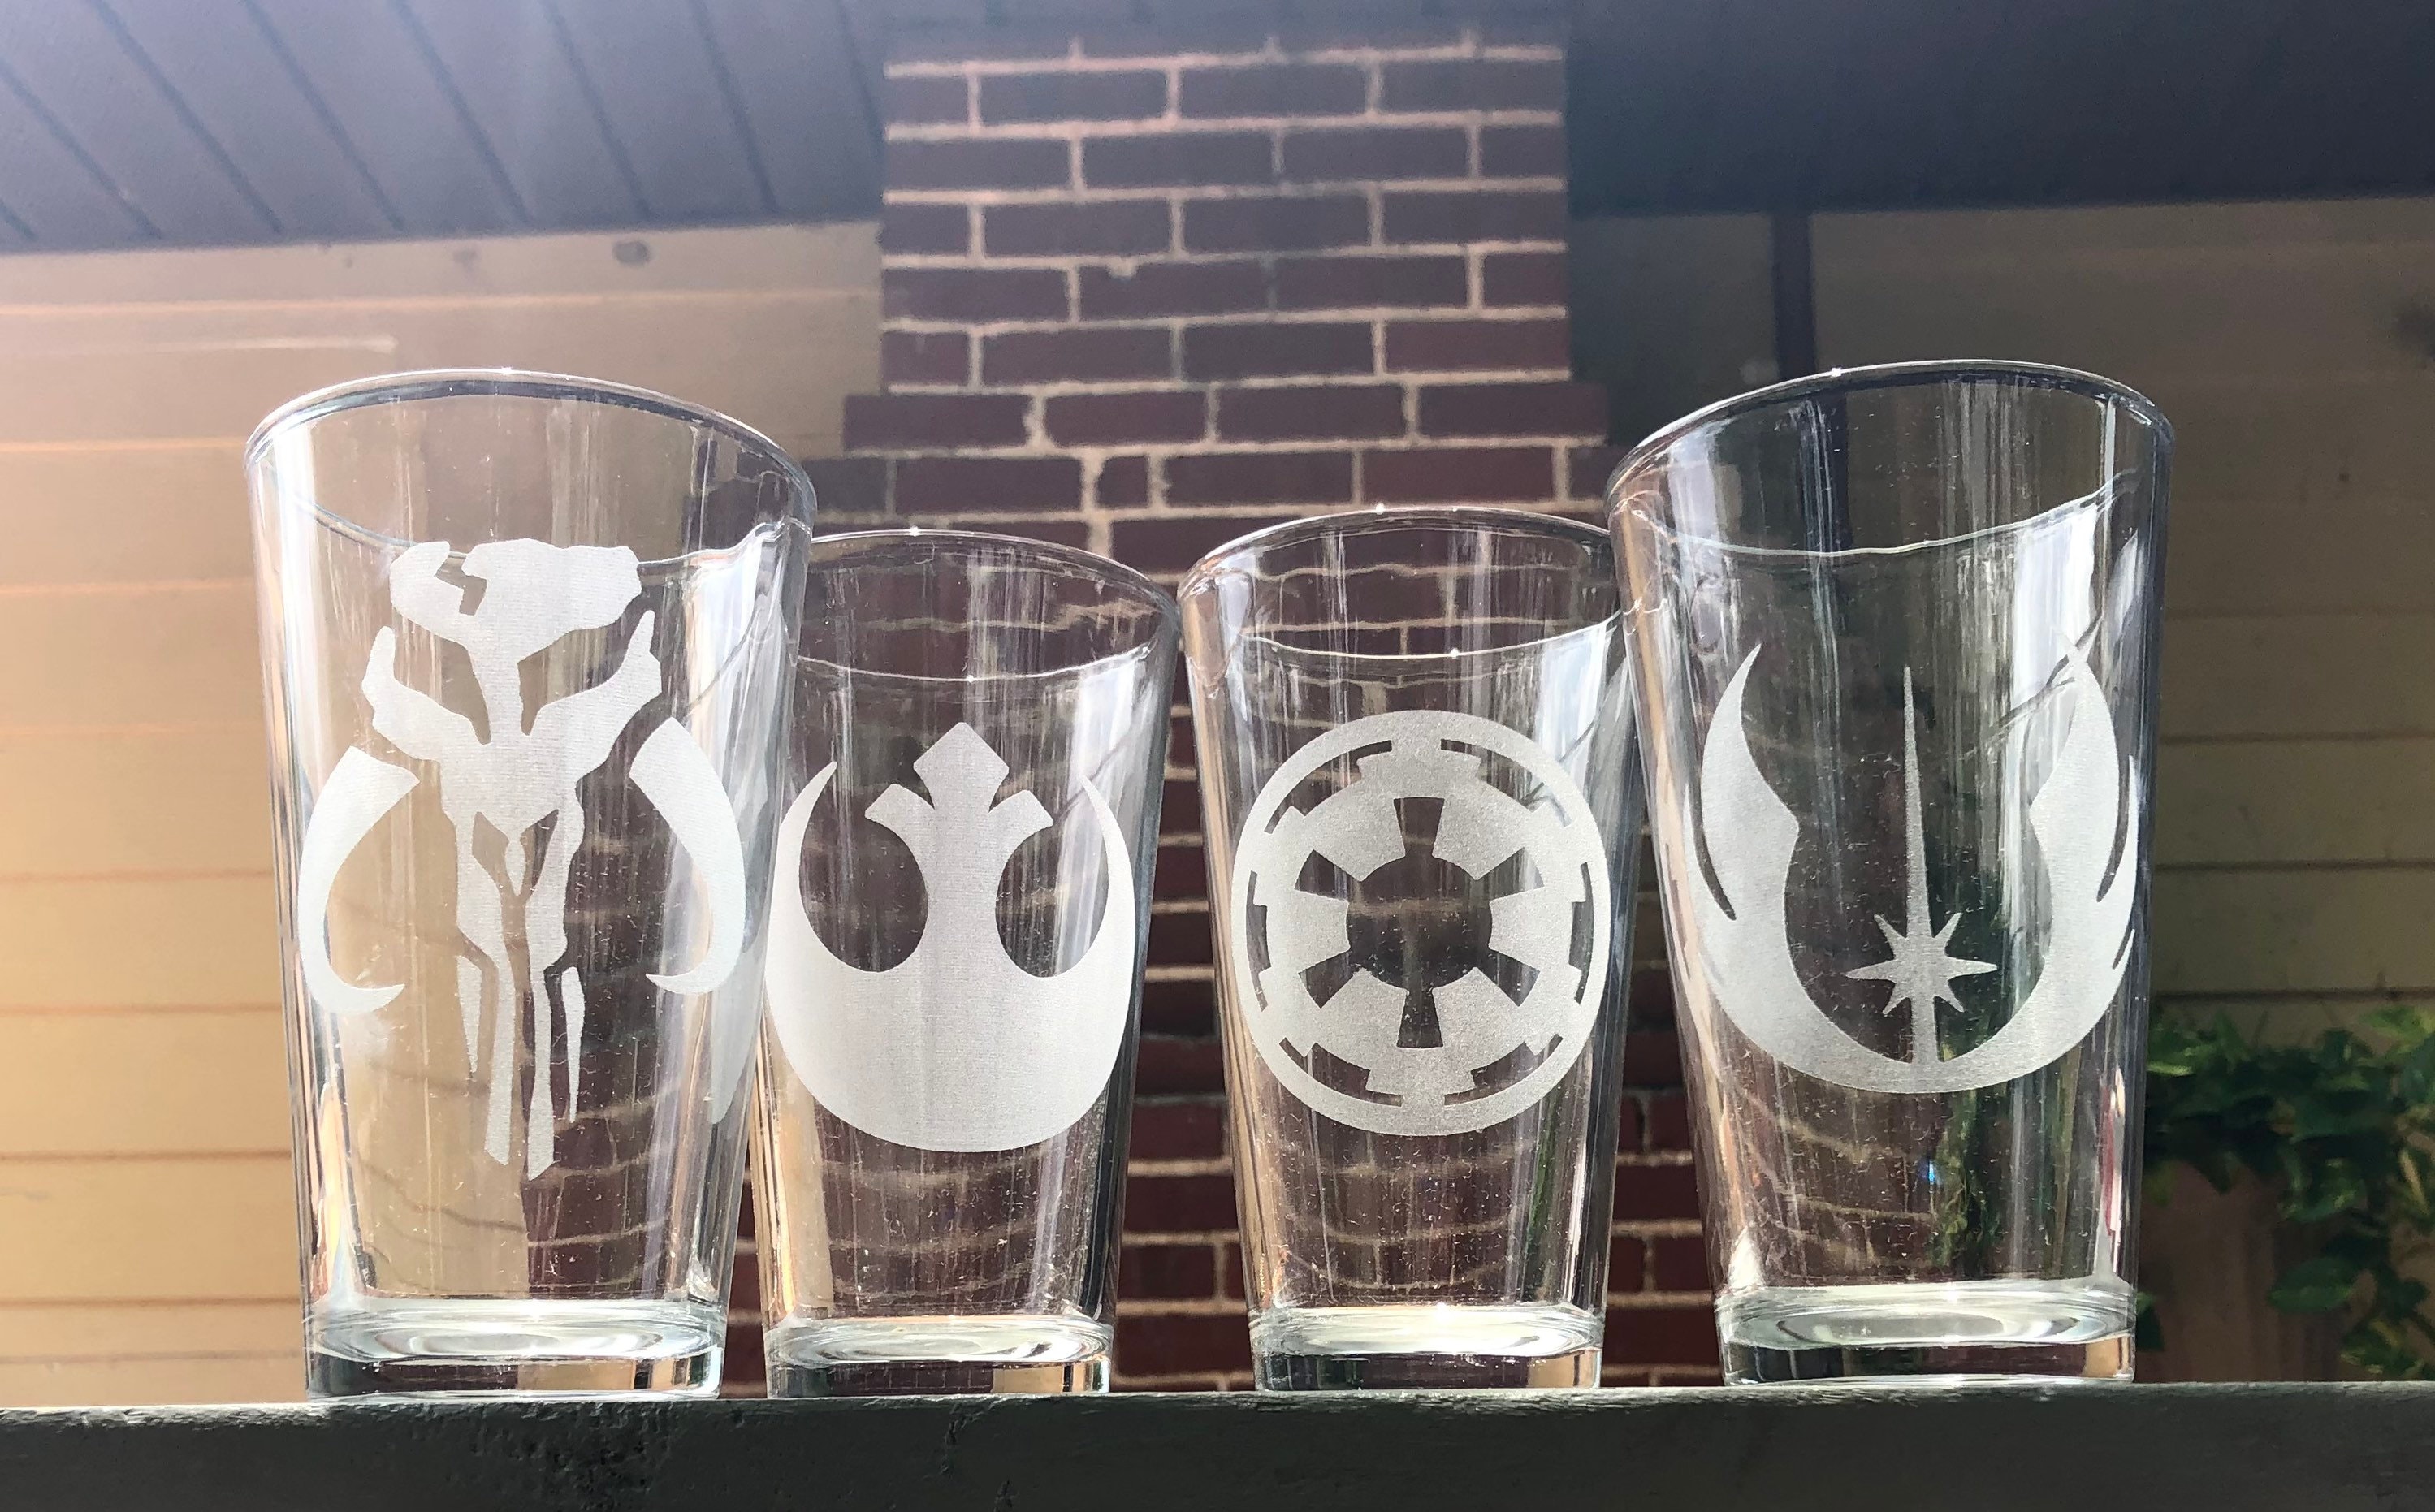 Star Wars 16 Ounce Clear Pint Glass - 4 ct